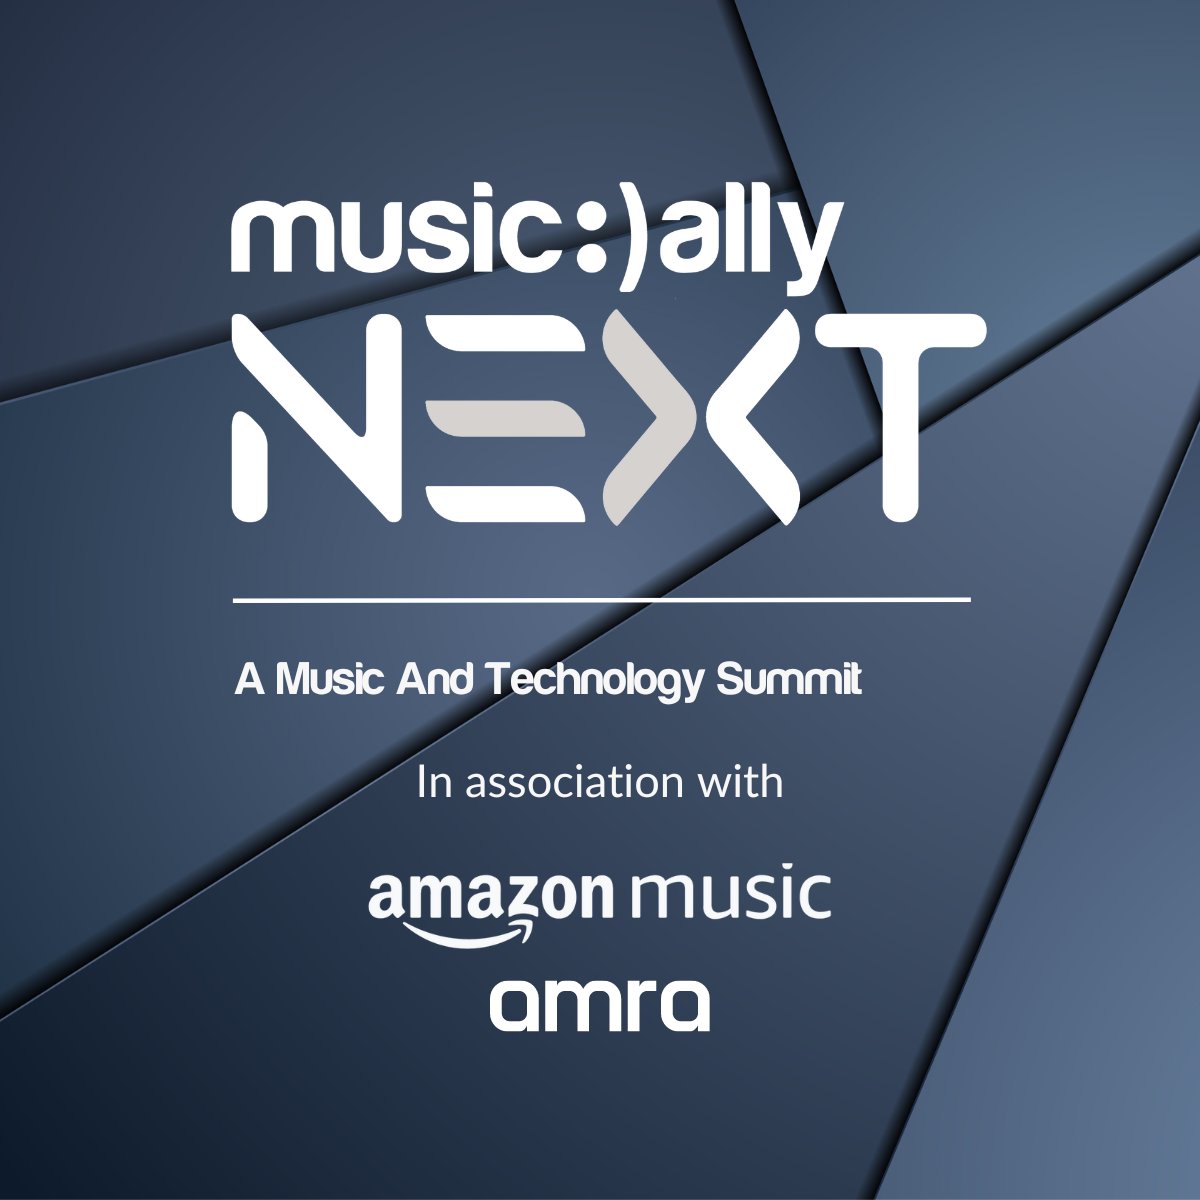 Music Ally NEXT 2024 agenda and speakers announced! Join discussions on AI, superfans, and more on June 18 in London. In partnership with @amazonmusic and @amra. Tickets available now. next.musically.com #MusicAllyNEXT #MusicTech #musically #musicnews #readmore